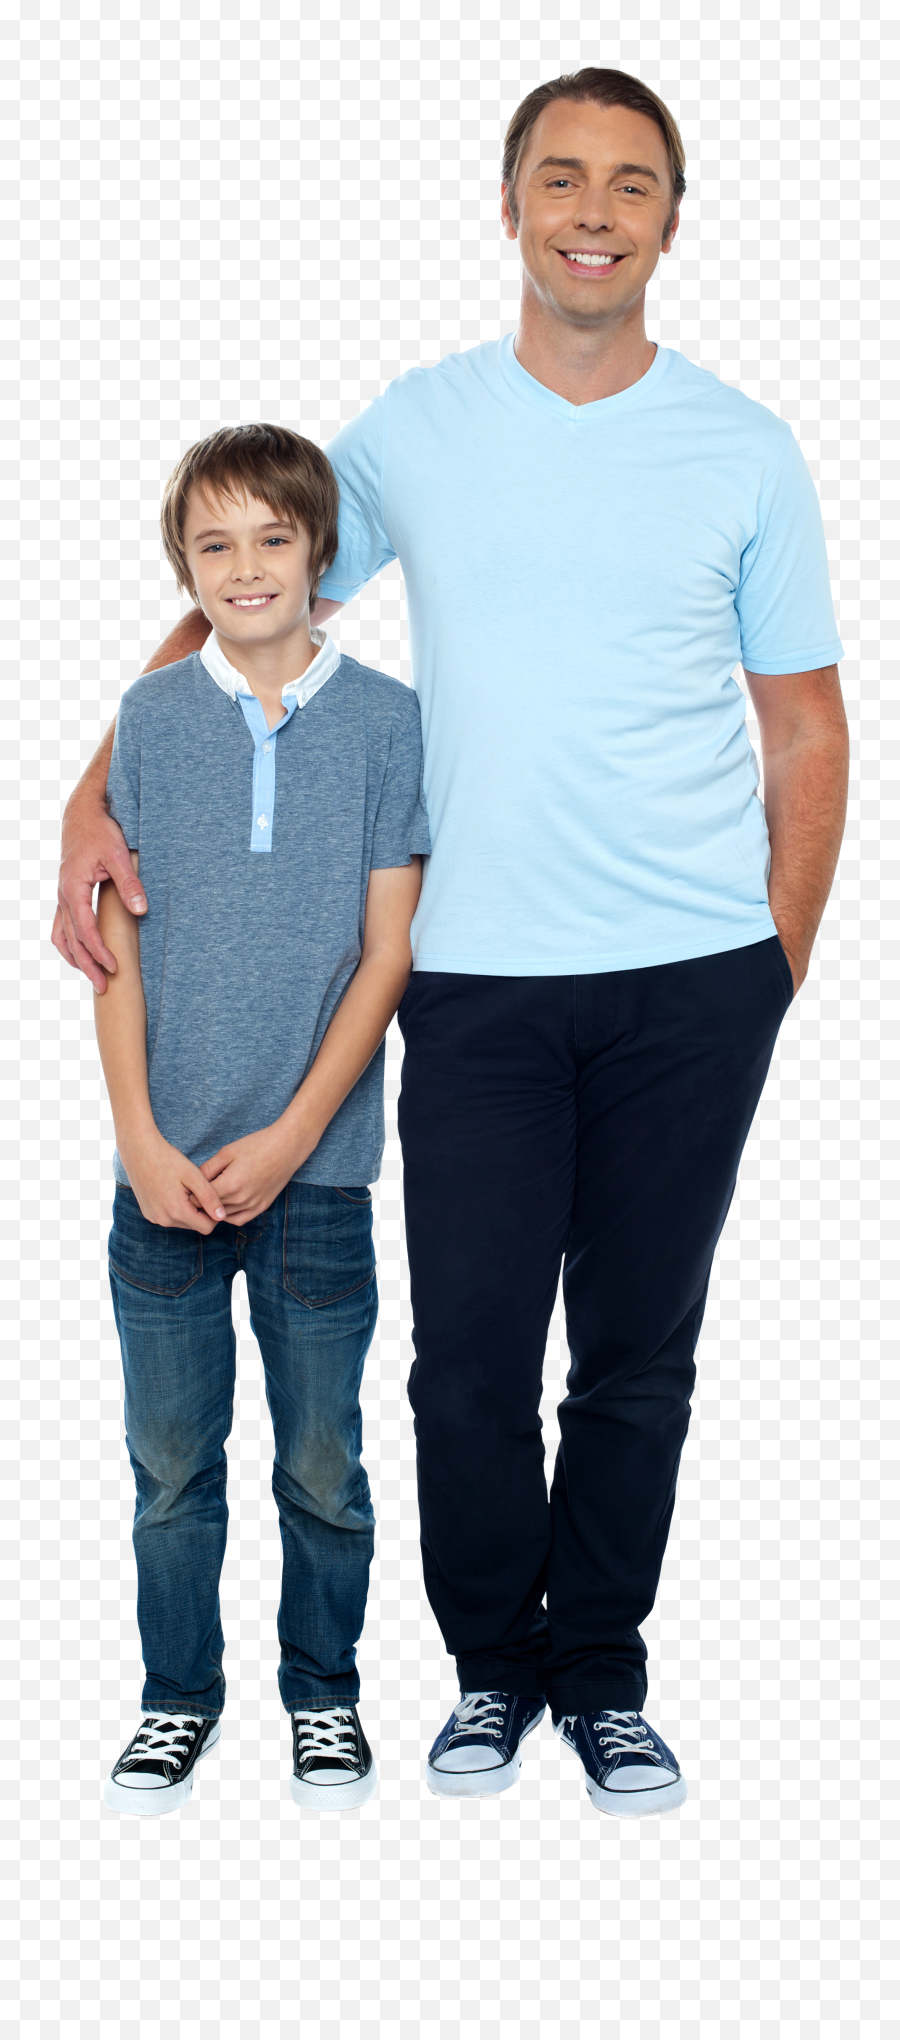 Father And Son Png Image - Purepng Free Transparent Cc0 Emoji,Daddy Png